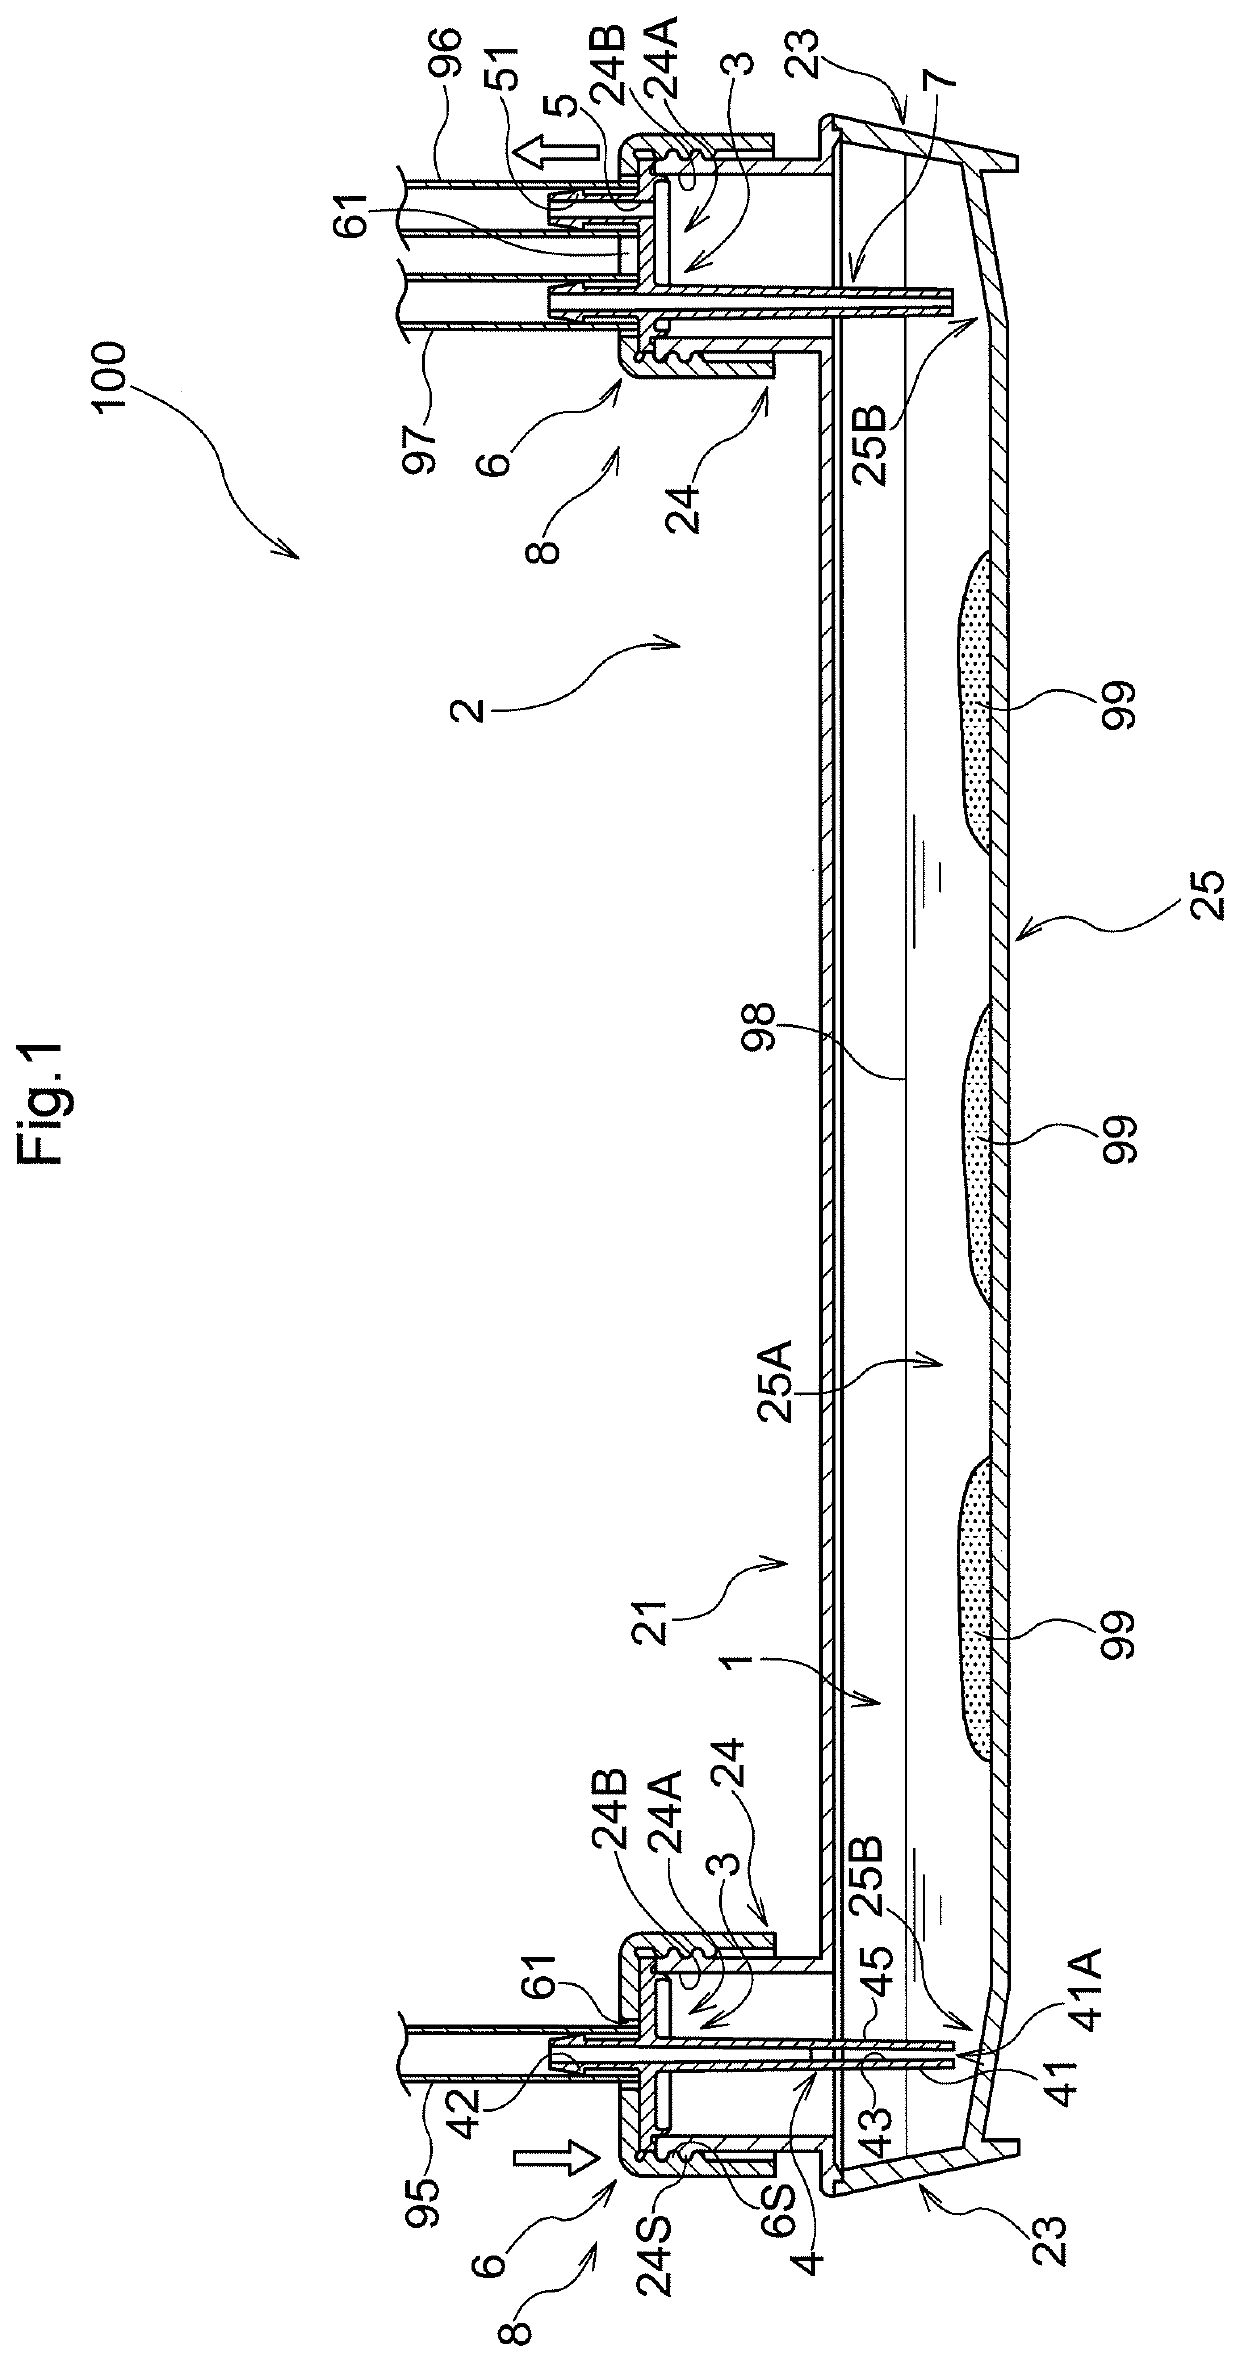 Culture Vessel and Cell Culture Device